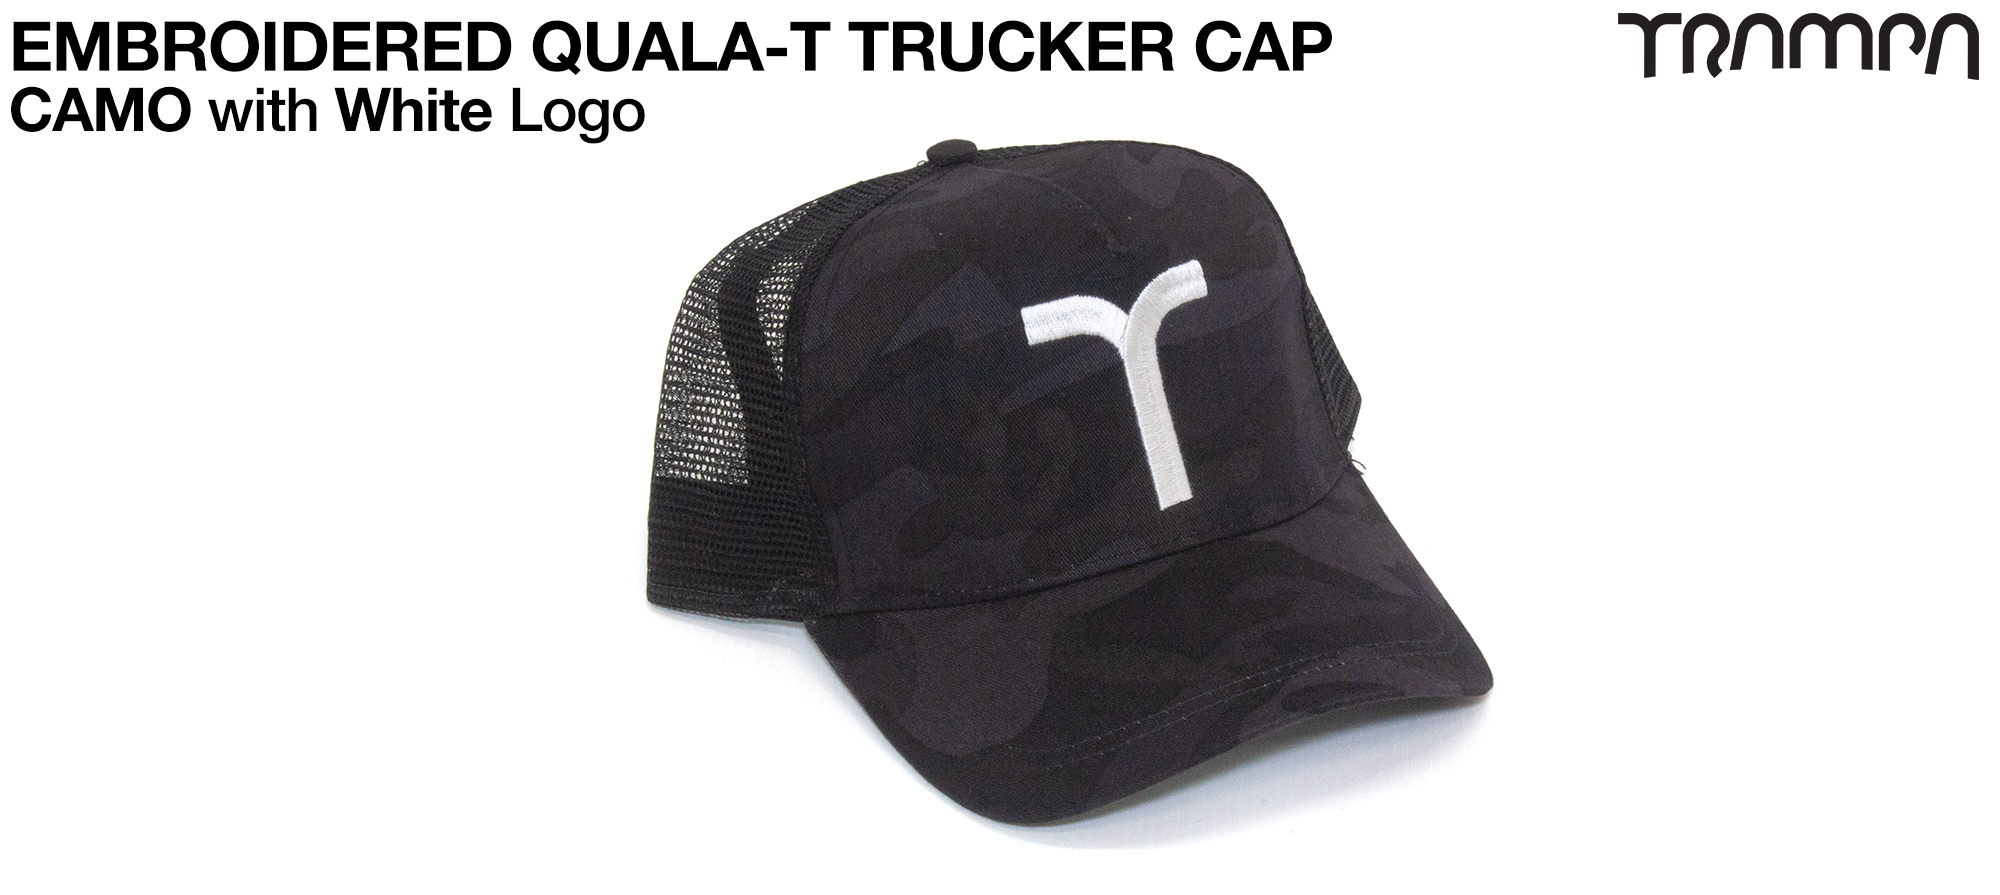 GREY Netted 5 Panel TRUCKER Cap with BLACK QUALA-T logo embroidered 